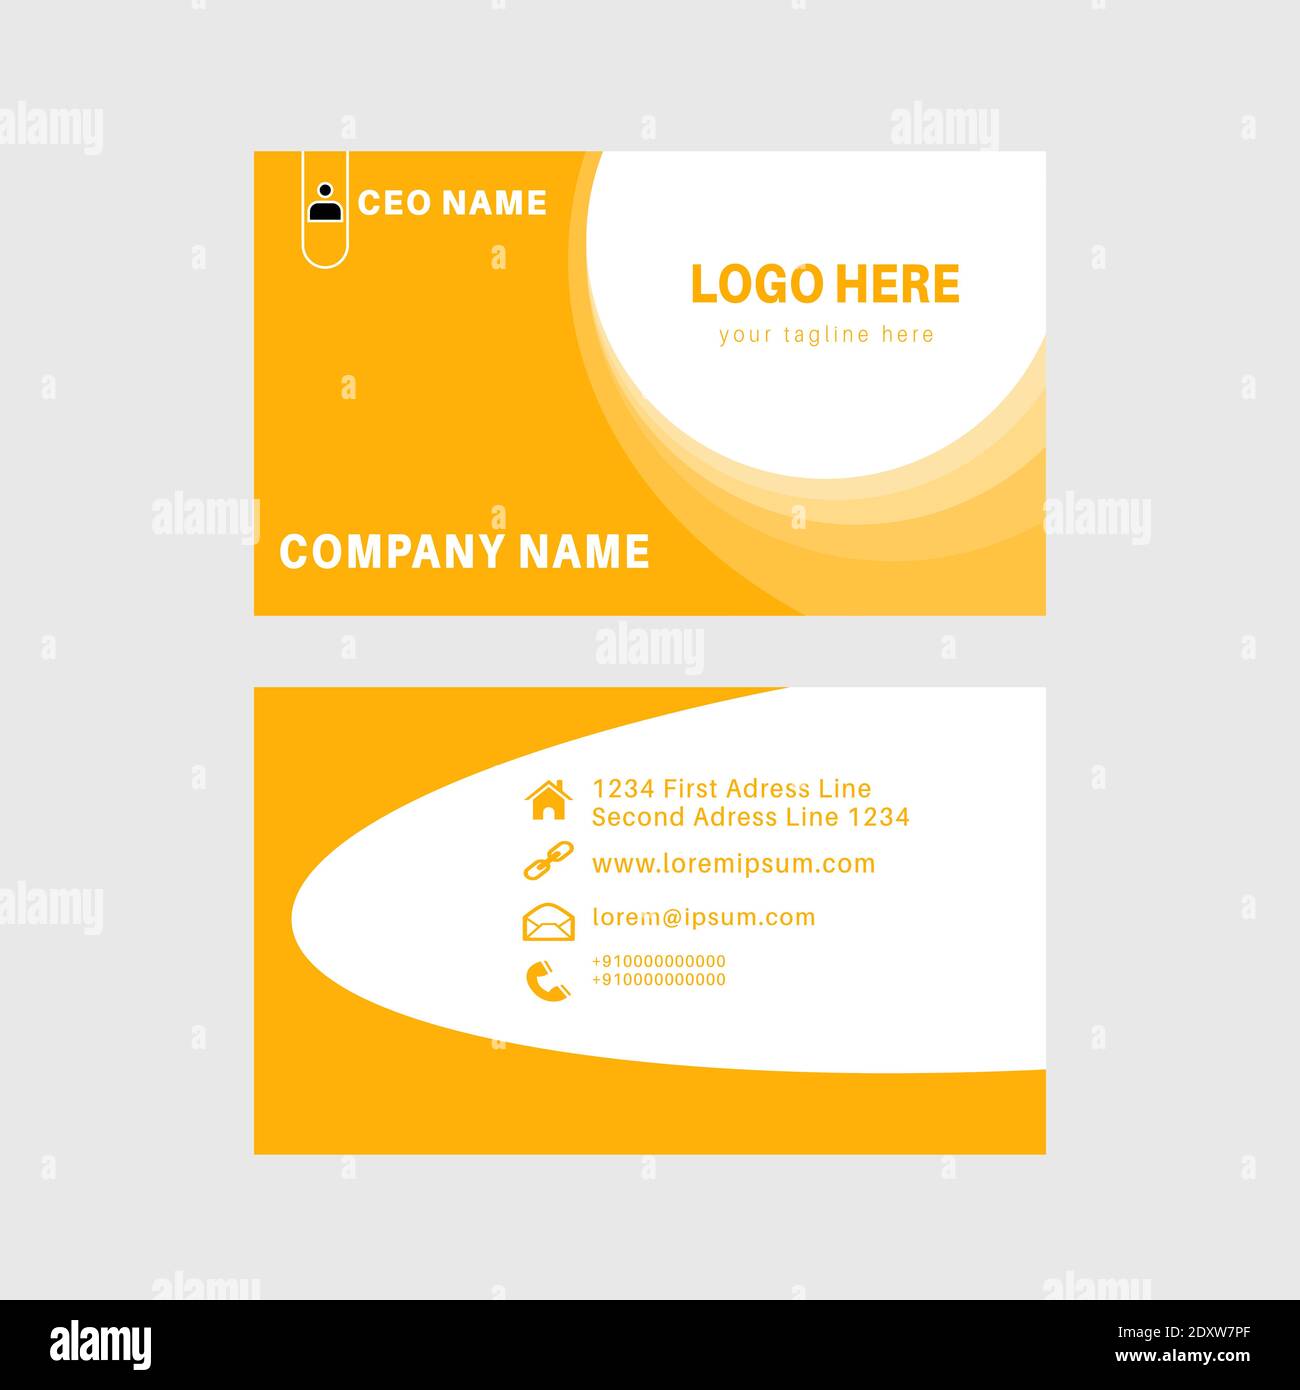 Professional Business Card Template Corporate Business Card Template